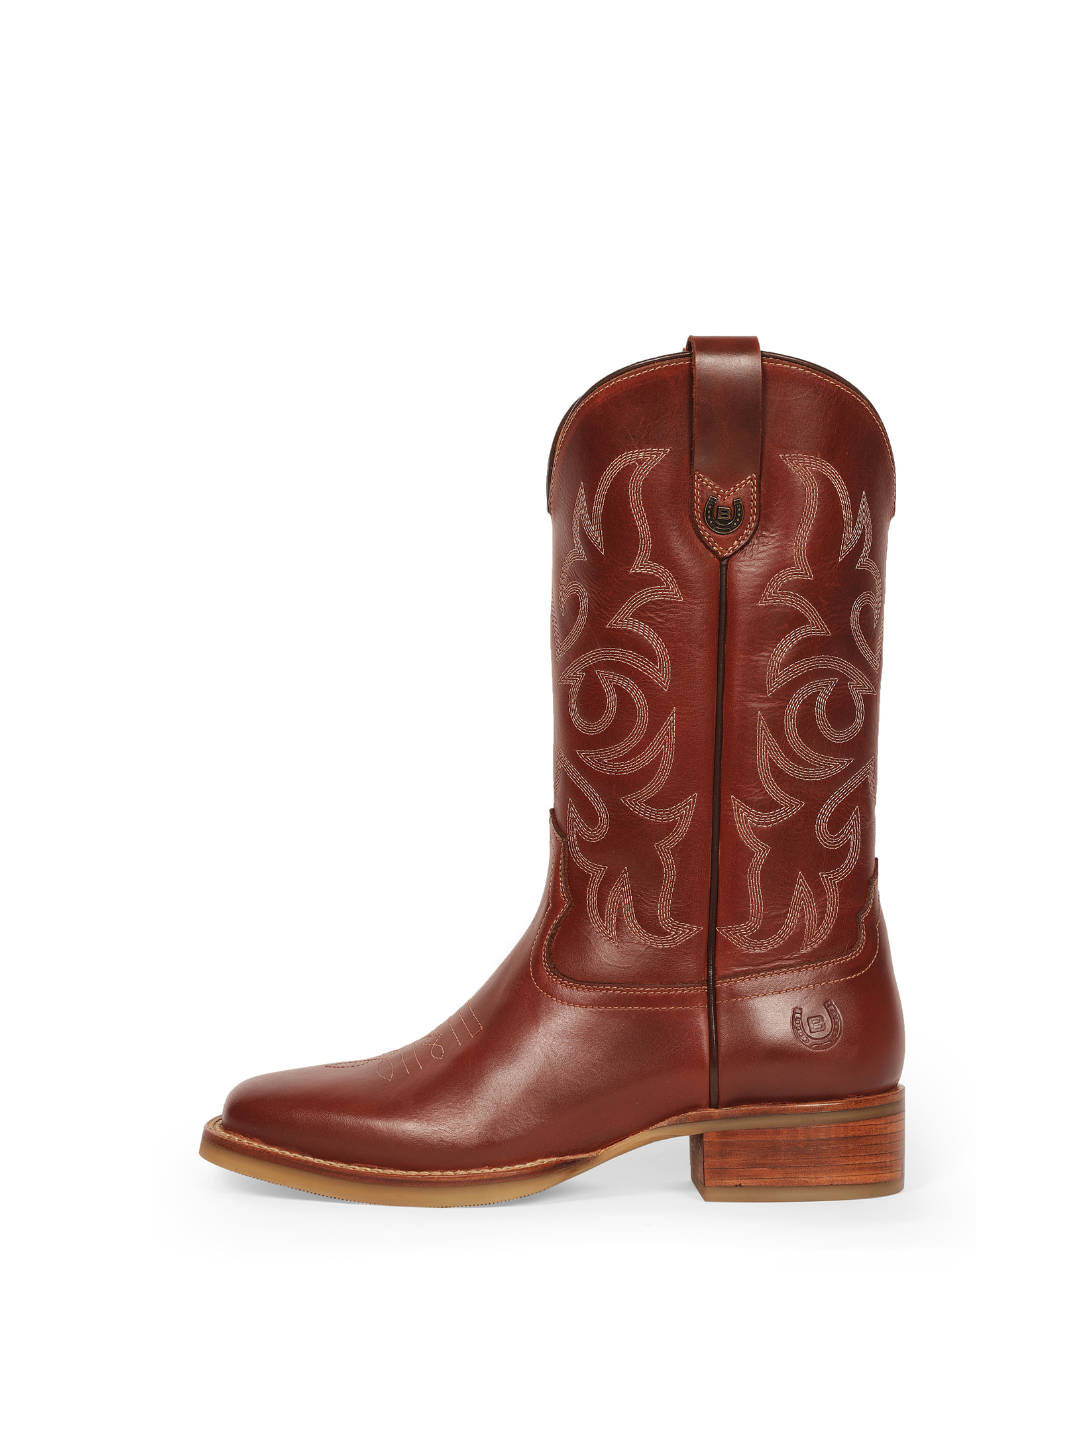 KENTUCKY - Heritage, ankle riding boots.